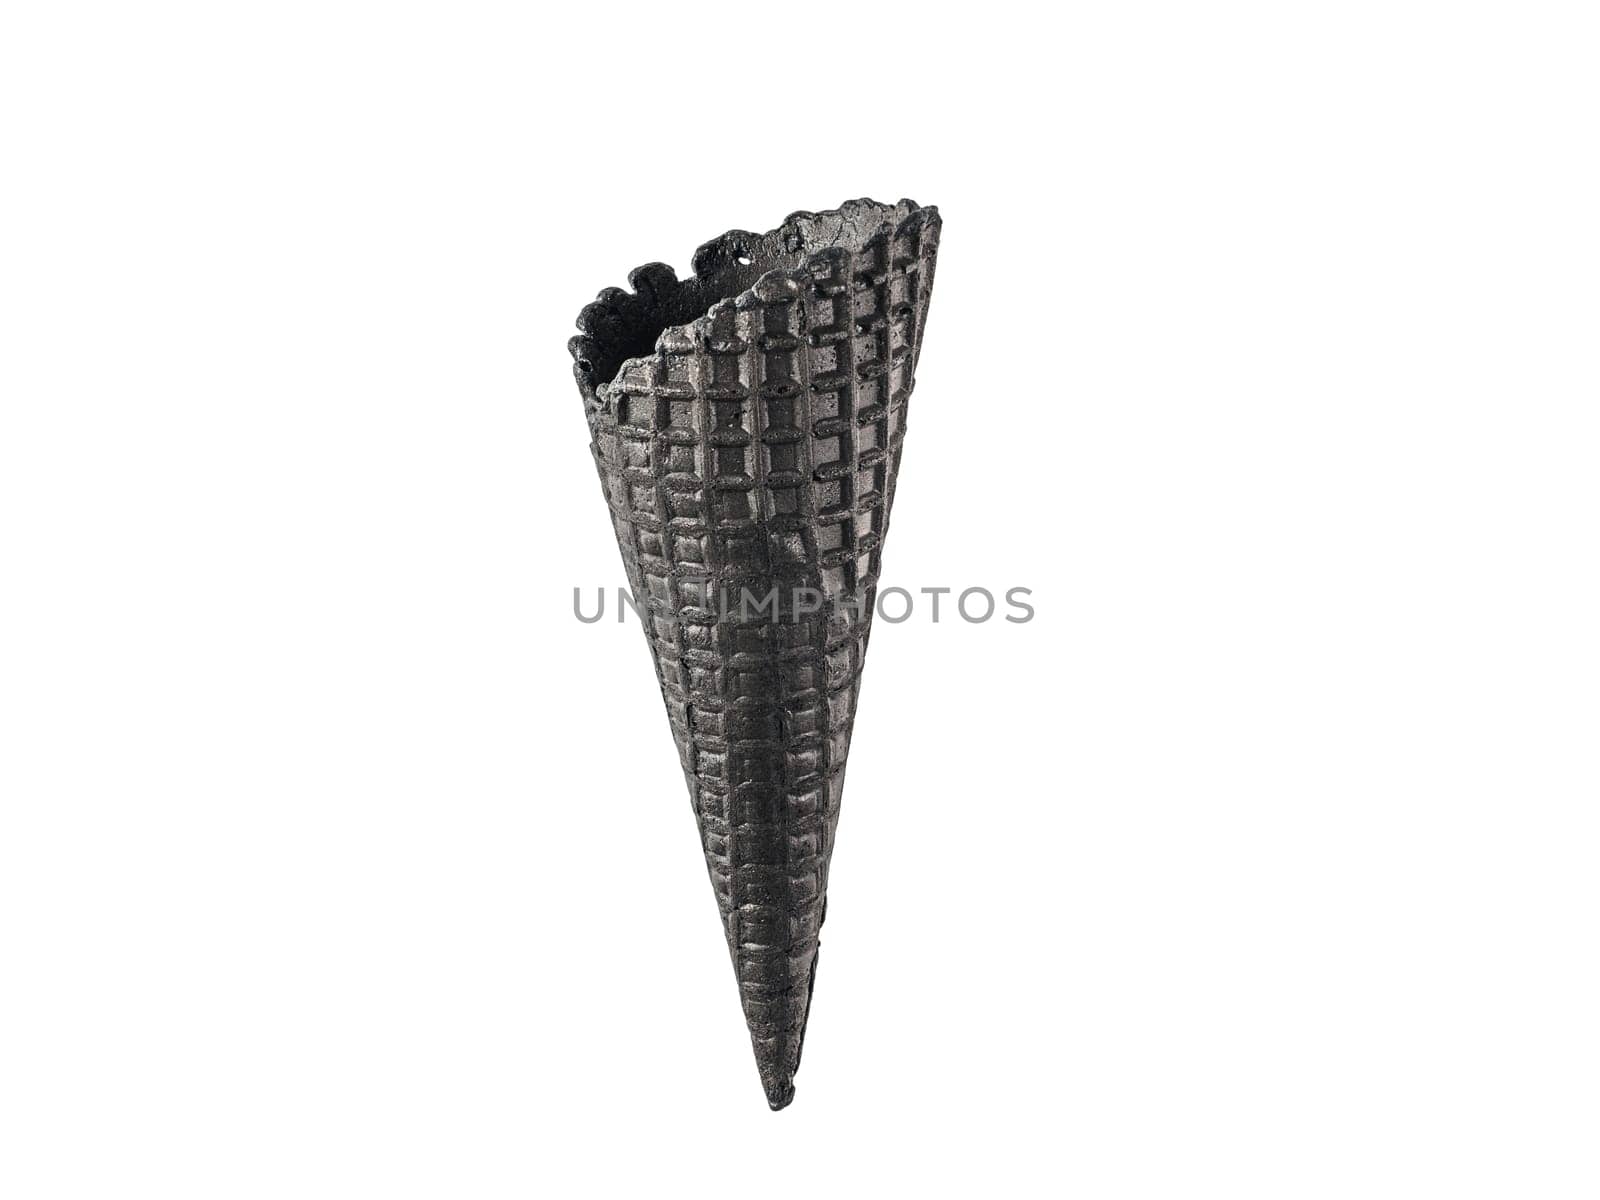 Black waffle sugar cone. Black wafer cone Isolated on white with clipping path.